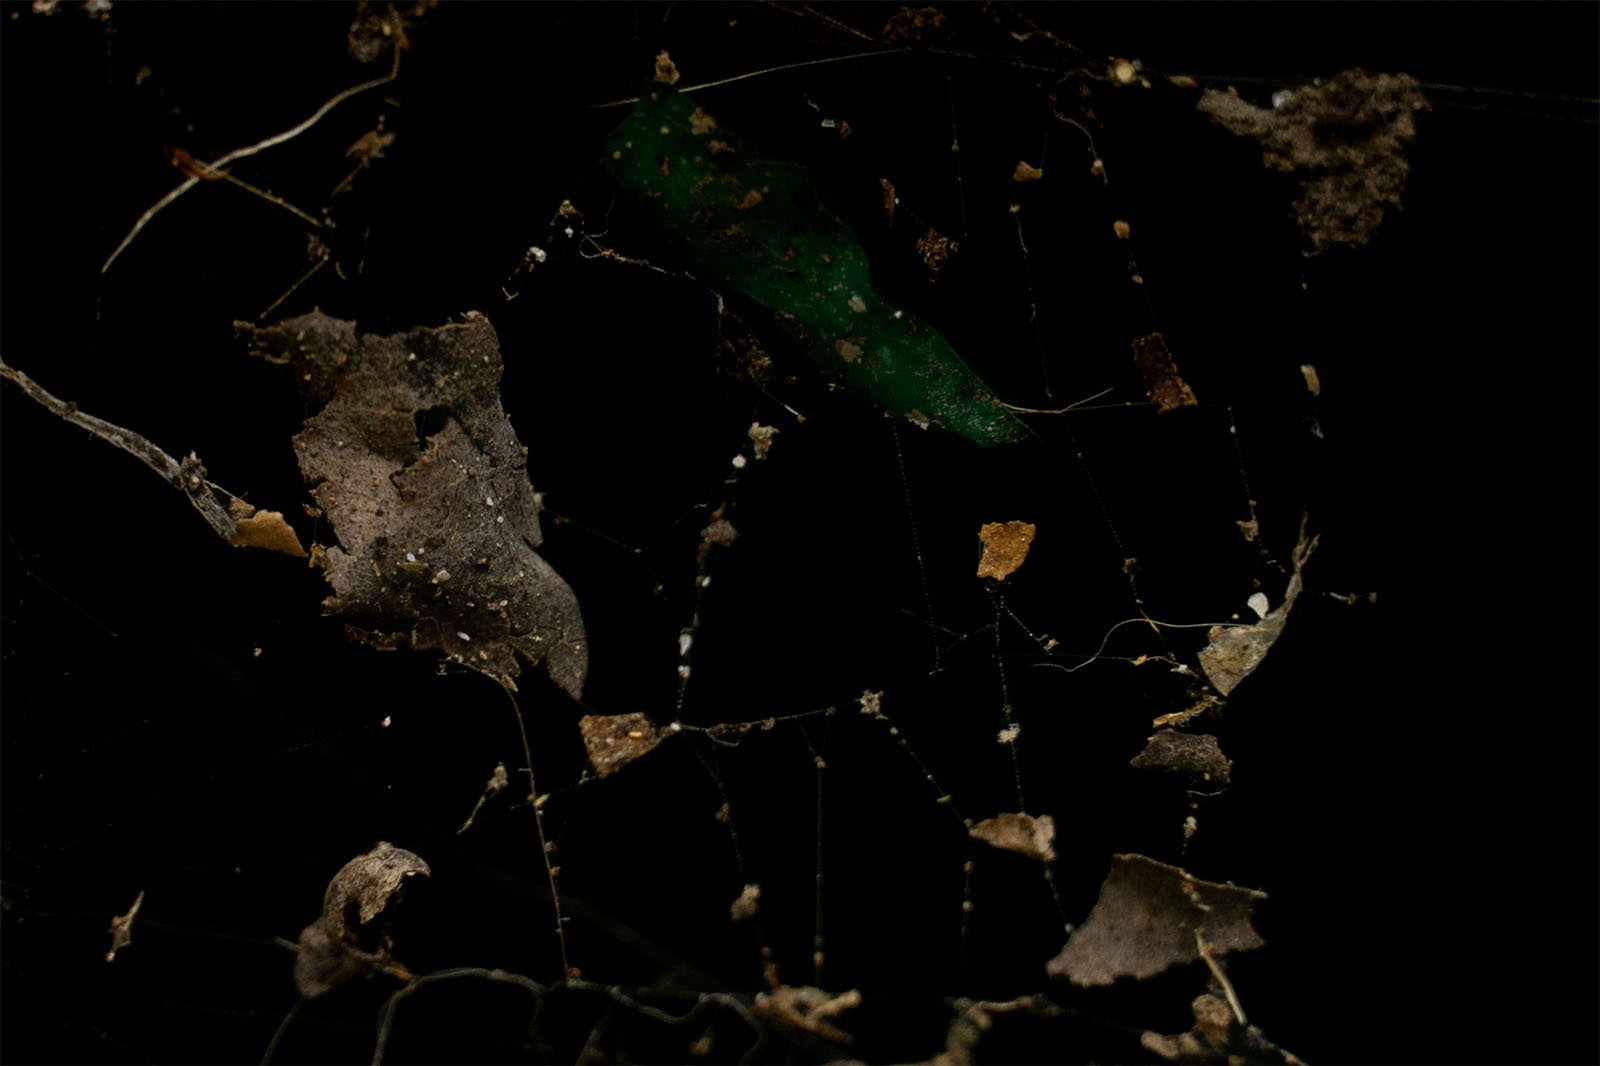 An image displaying various debris like leaves and twigs caught in a spider web in a dimly lit setting, creating a mysterious and cluttered appearance.